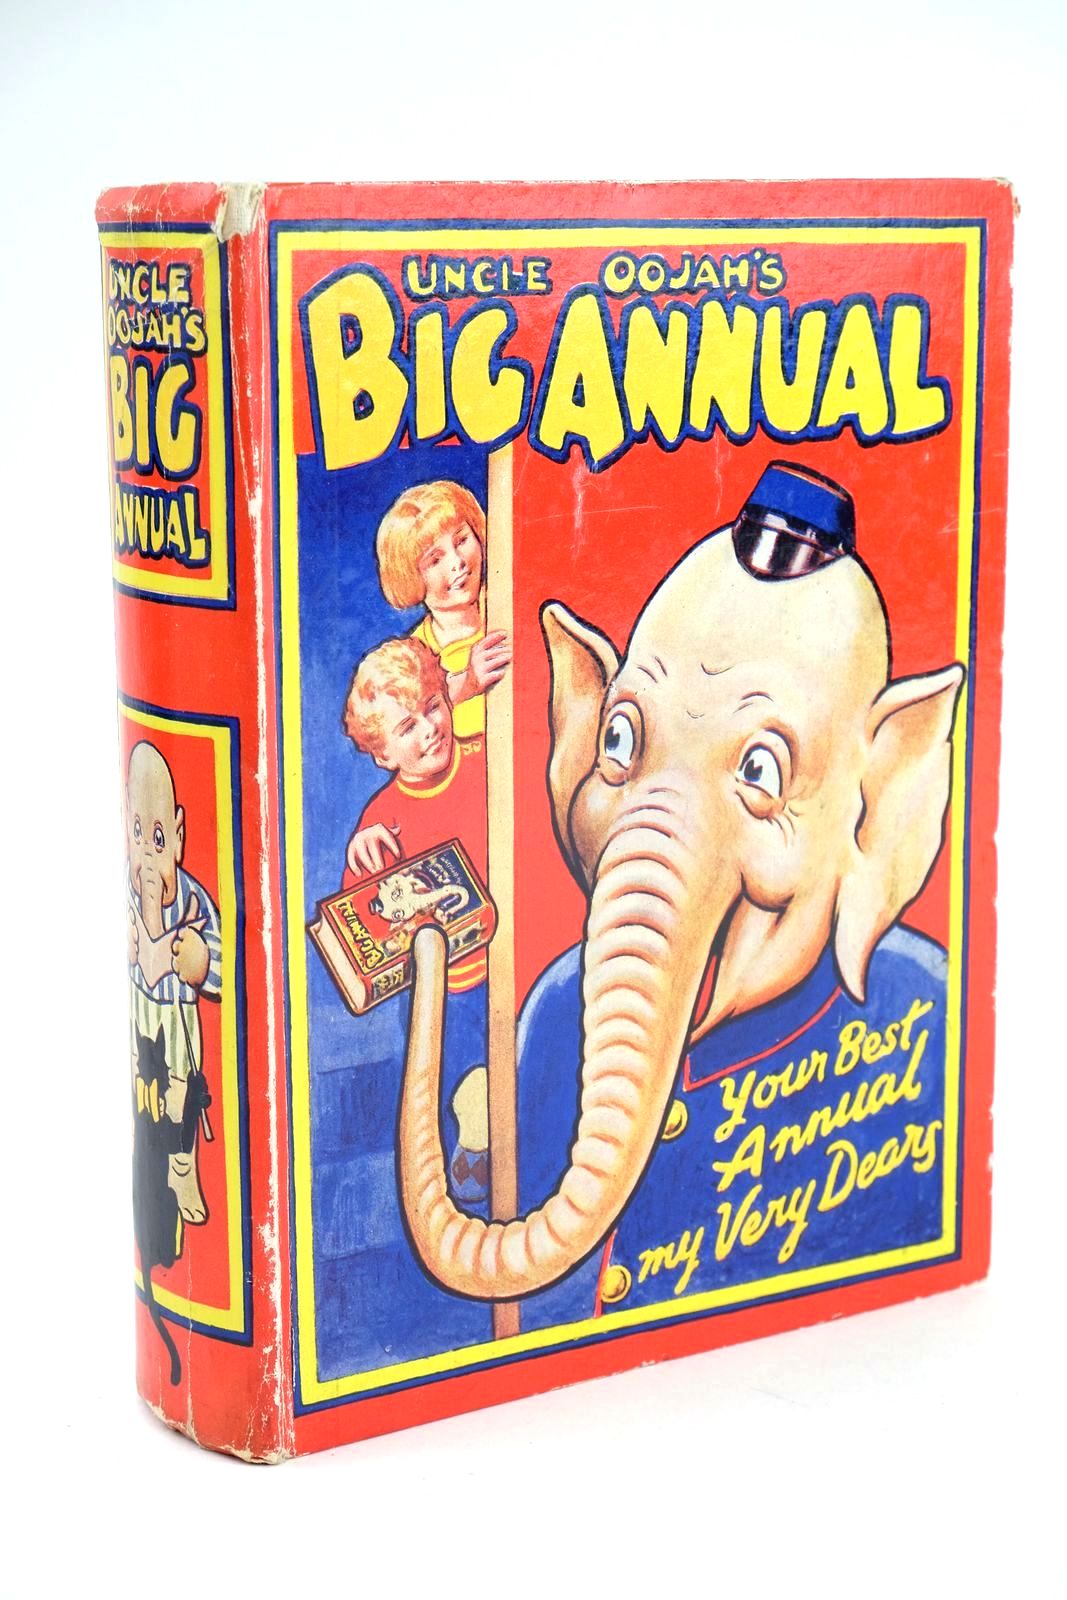 Photo of UNCLE OOJAH'S BIG ANNUAL written by Lancaster, Flo Christie, G.F. et al, illustrated by Heath, Irene Jacobs, Helen et al., published by Allied Newspapers Limited (STOCK CODE: 1324793)  for sale by Stella & Rose's Books